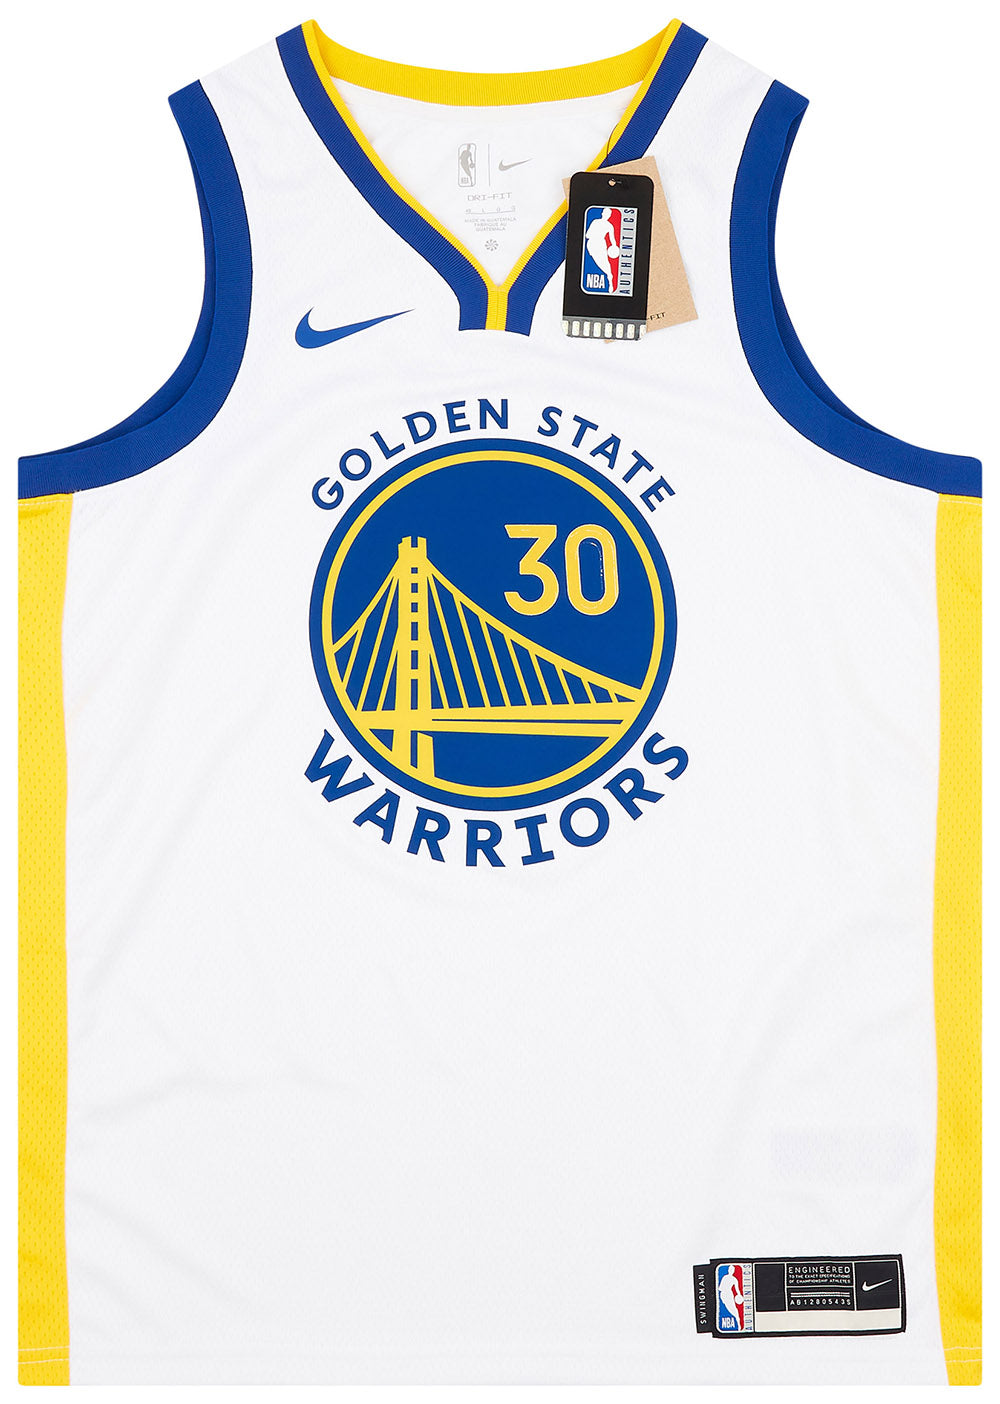 2017-21 GOLDEN STATE WARRIORS CURRY #30 NIKE SWINGMAN JERSEY (HOME) L -  Classic American Sports